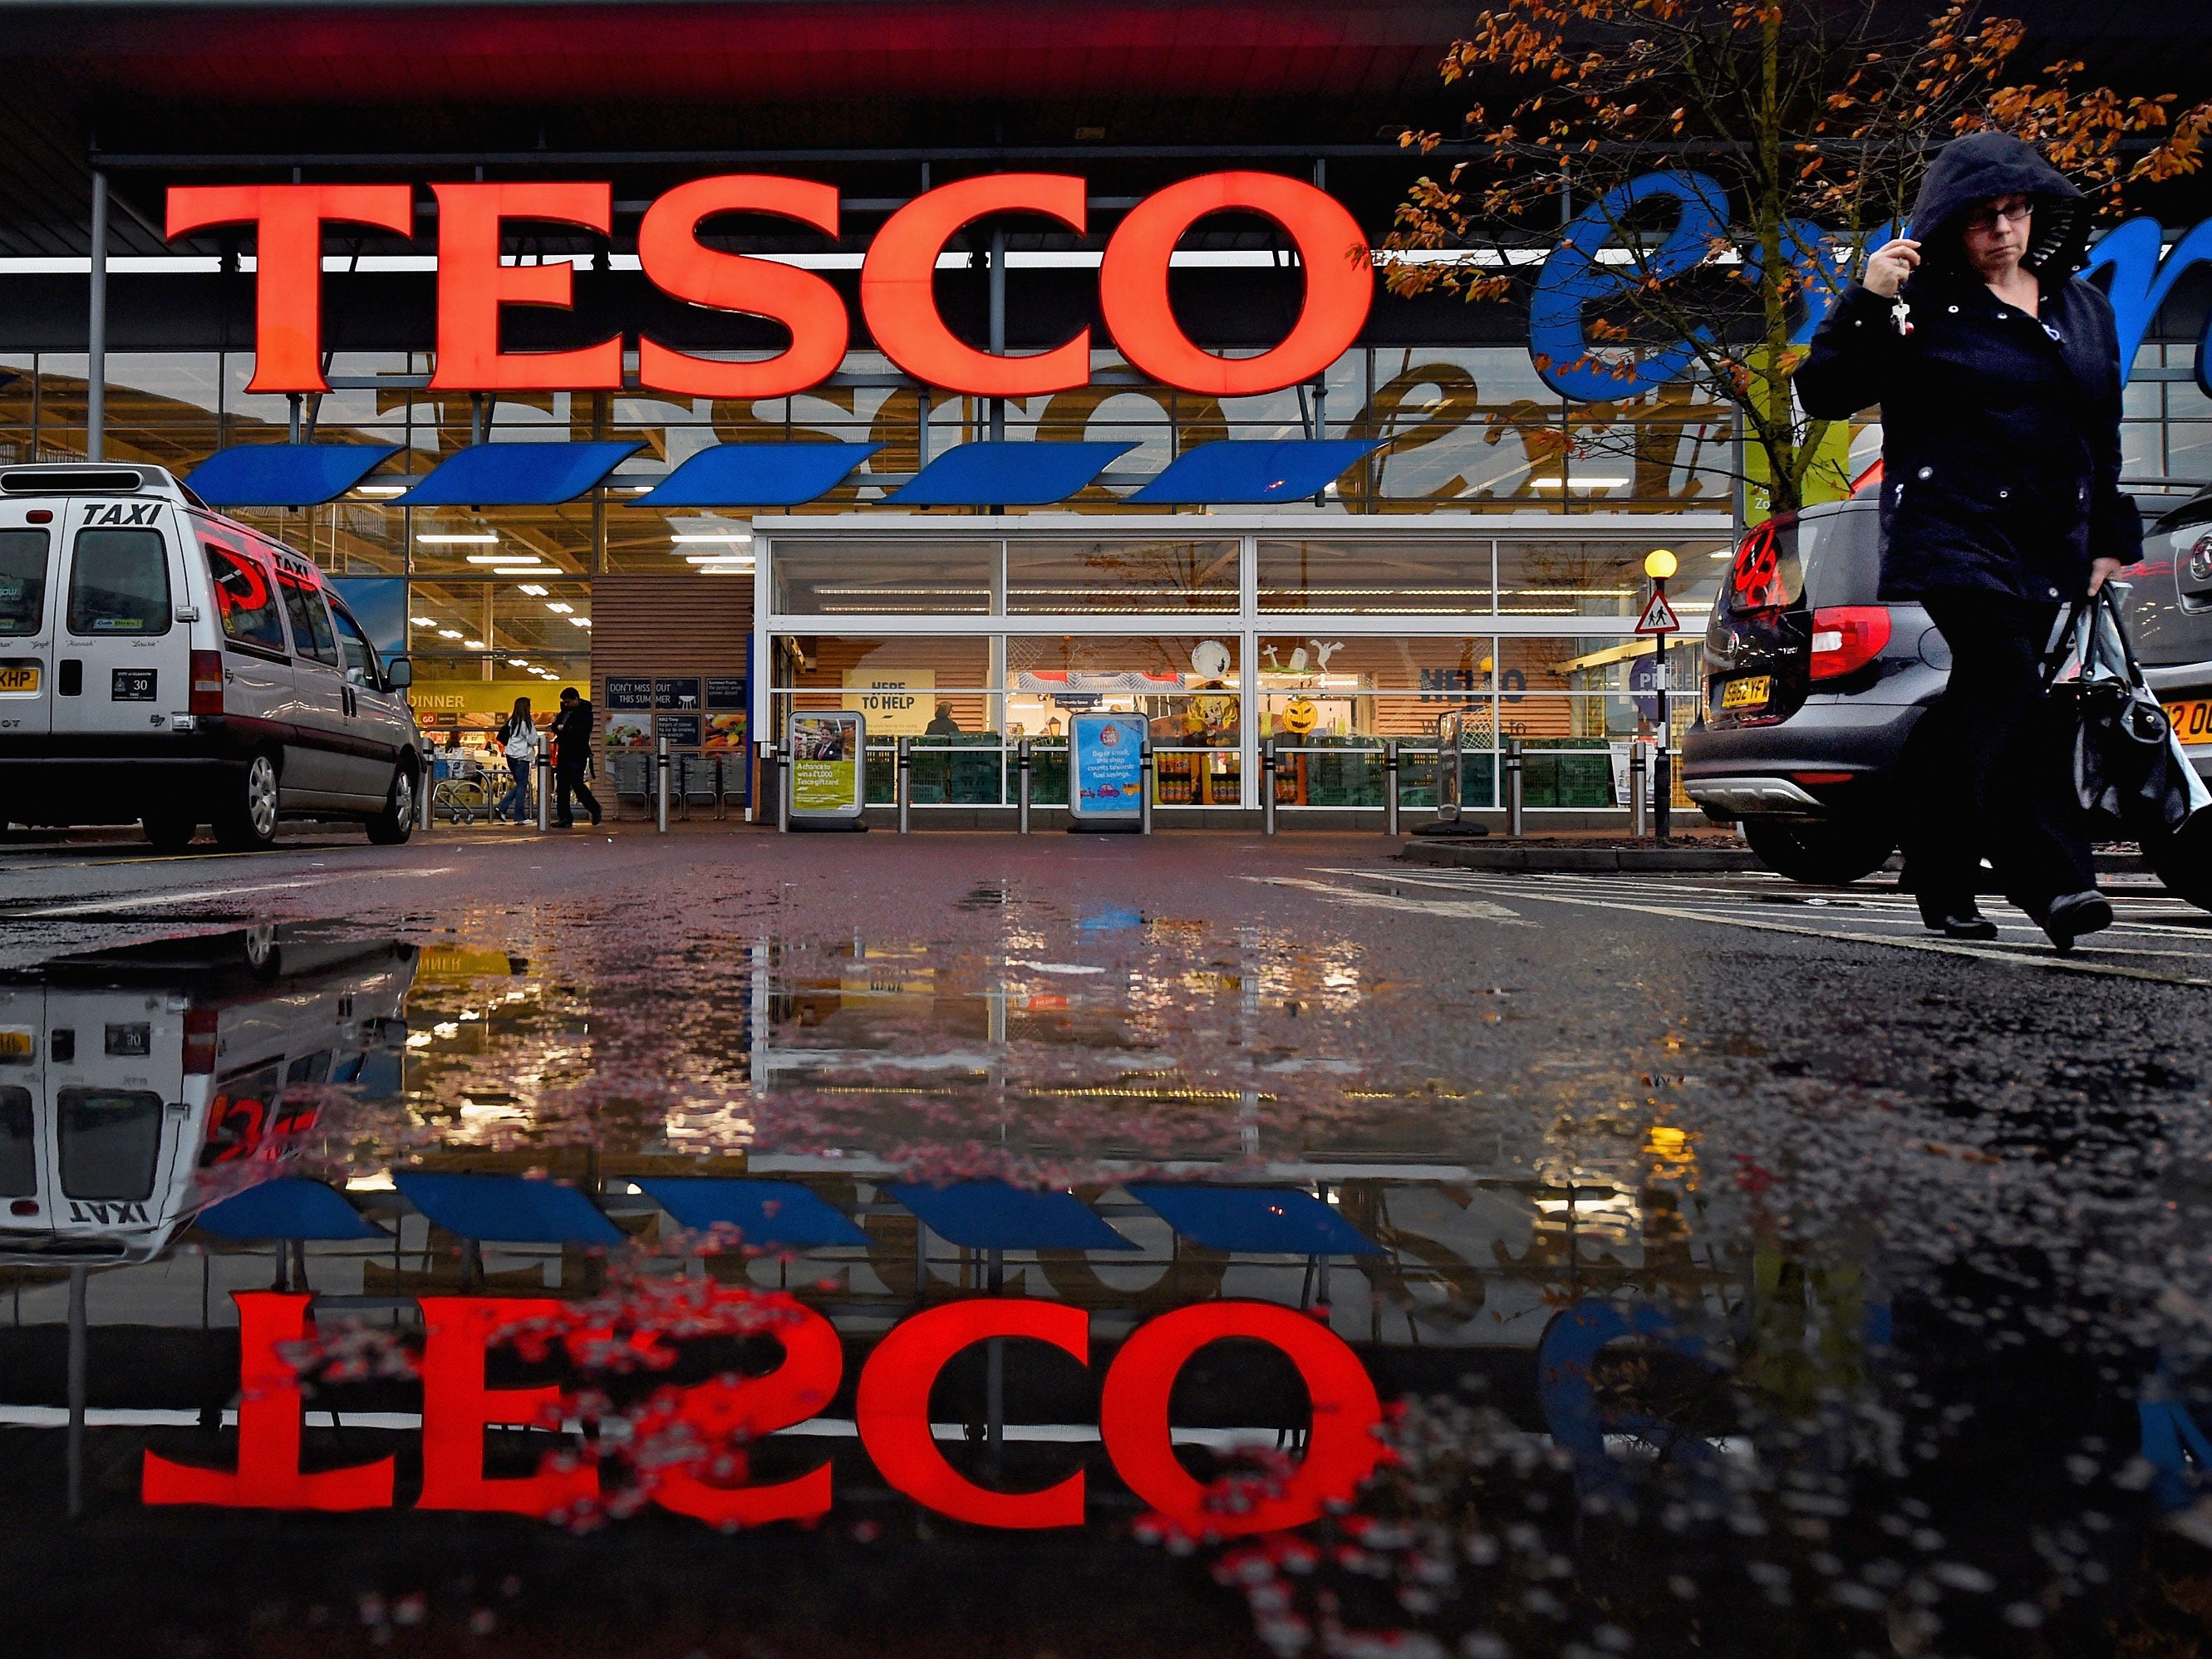 On 22 September 2014 Tesco announced that it had overstated its expected profit for the half year by £263 million